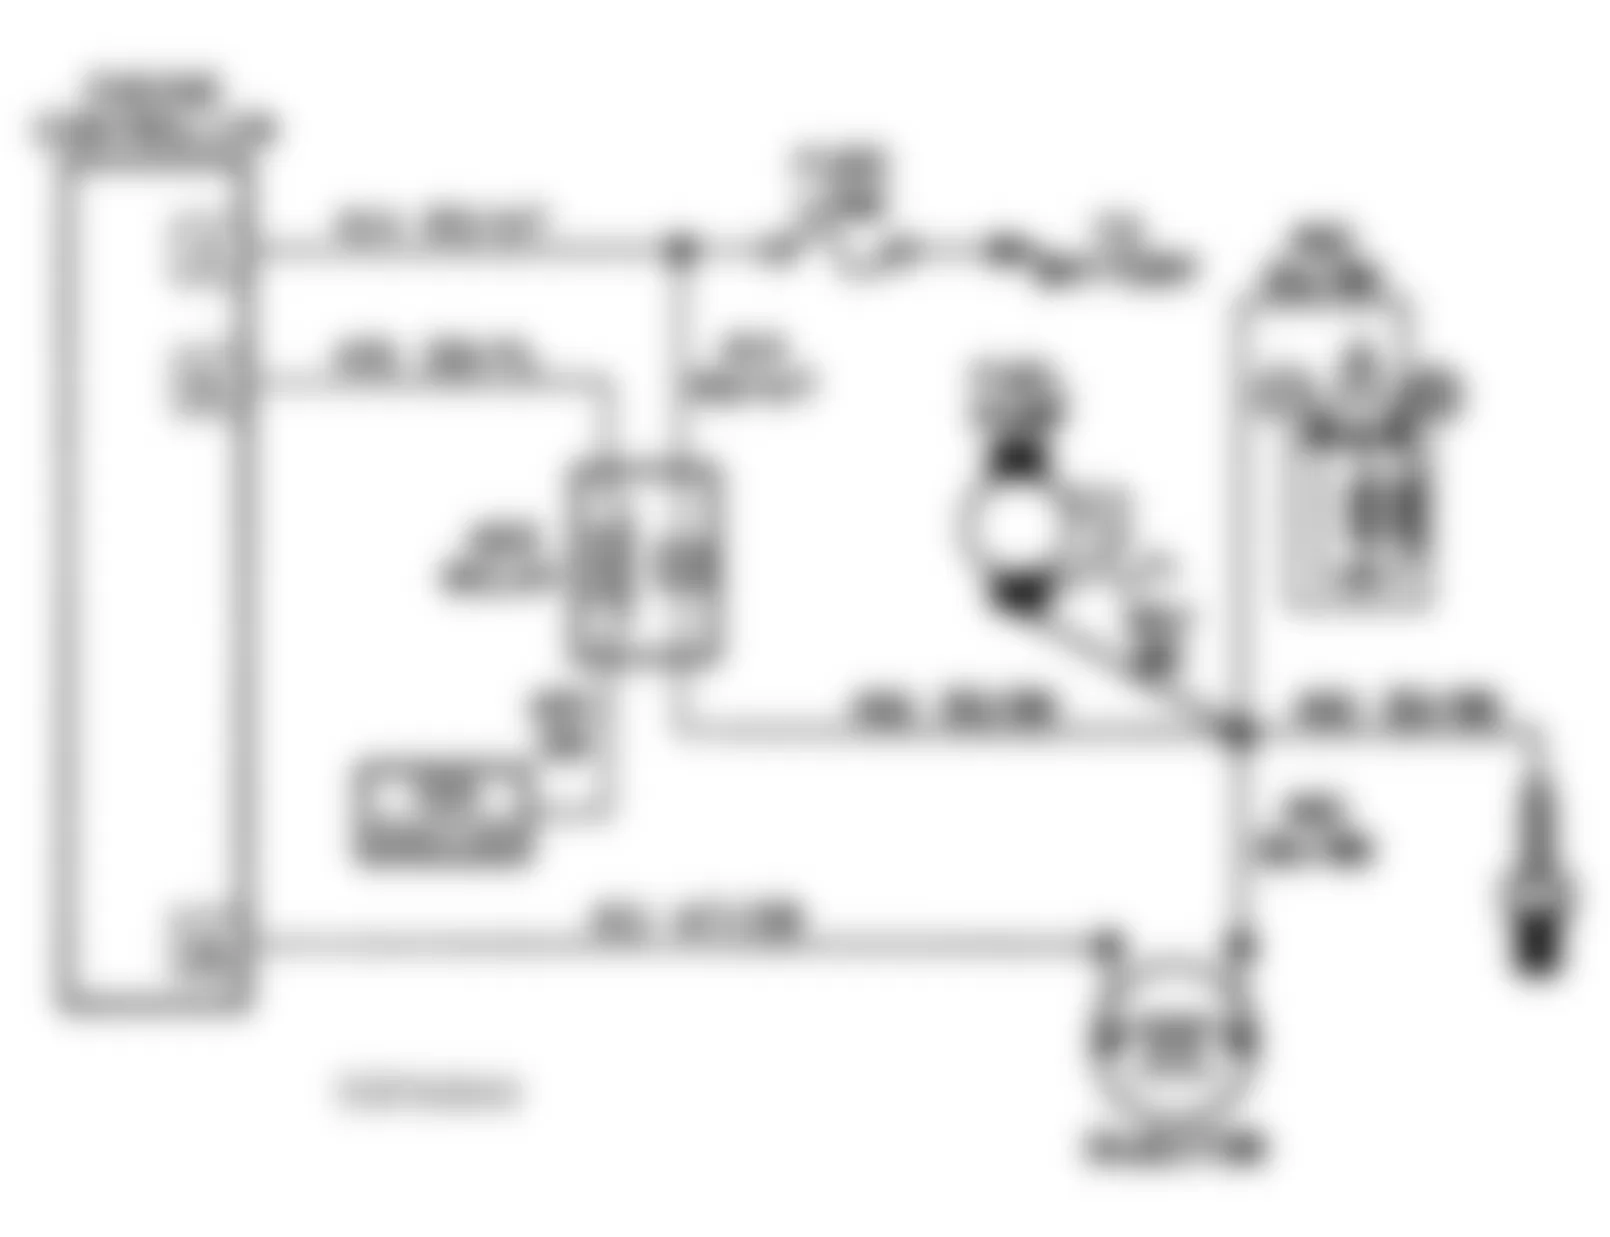 Chrysler LeBaron LX 1991 - Component Locations -  Test NS-2A, Circuit Diagram.